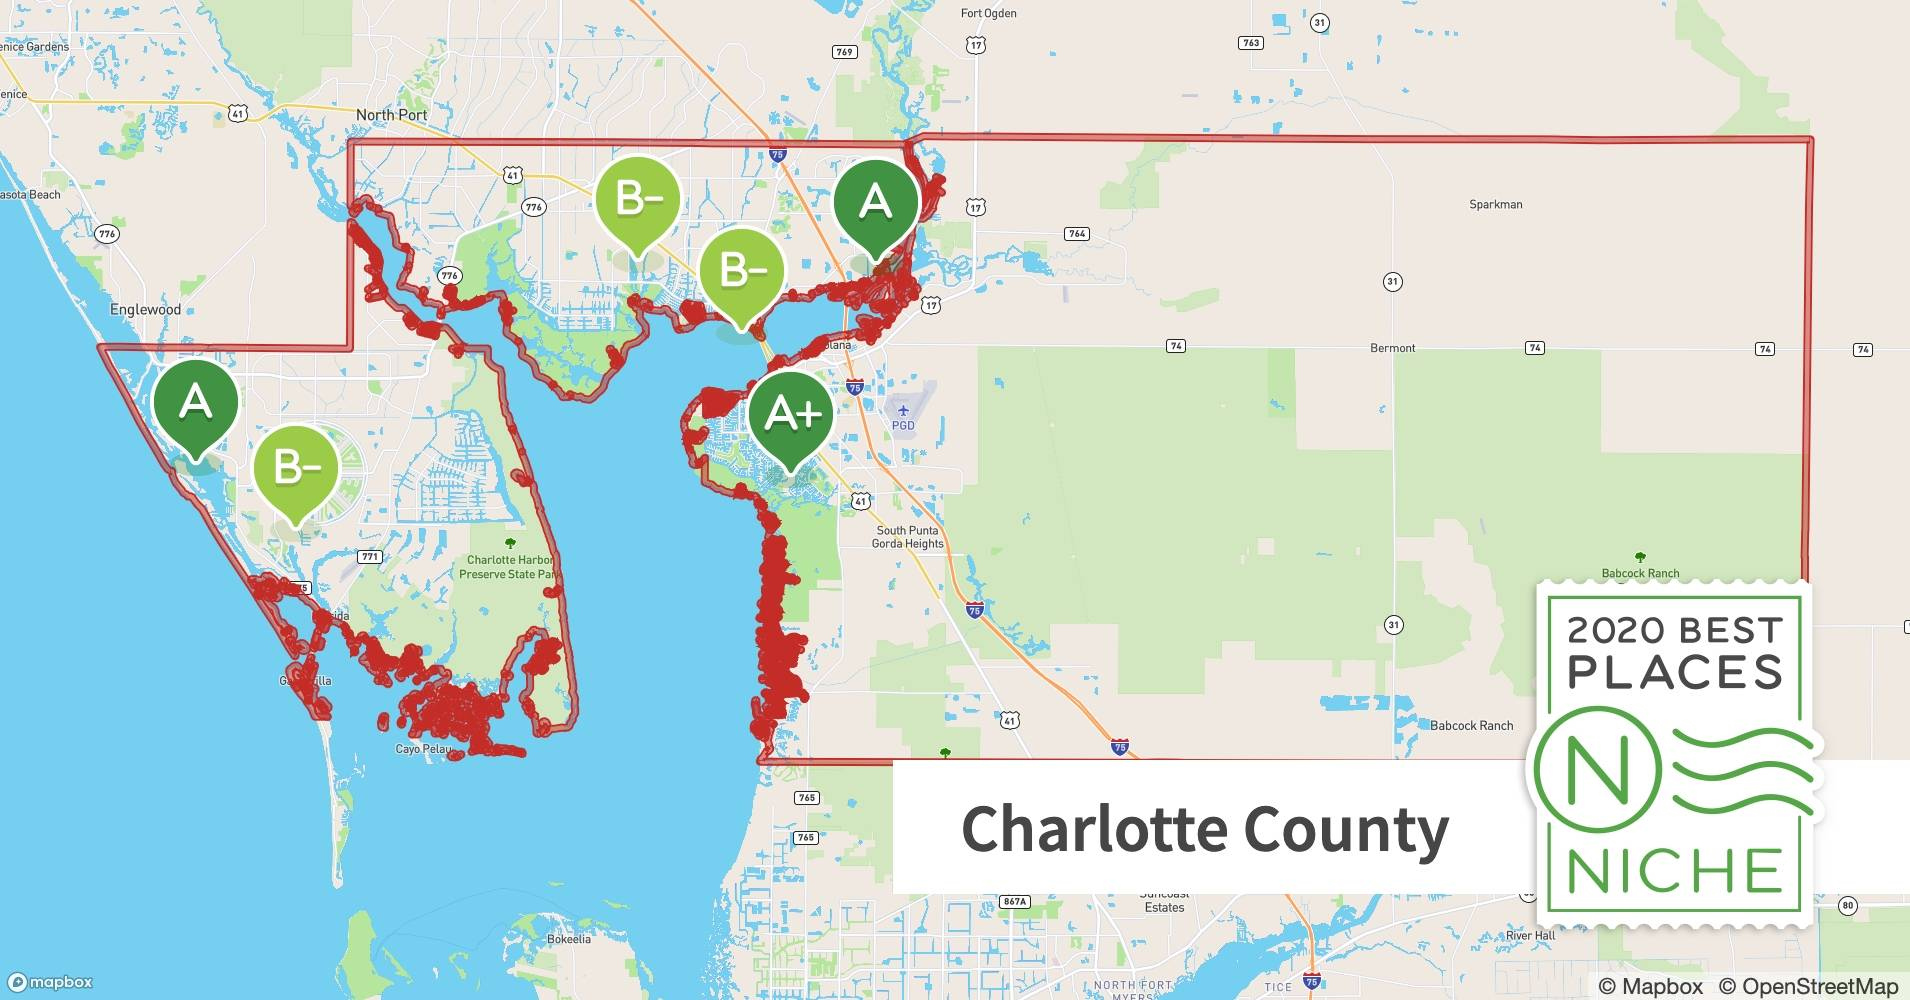 2020 Best Places To Live In Charlotte County FL Niche